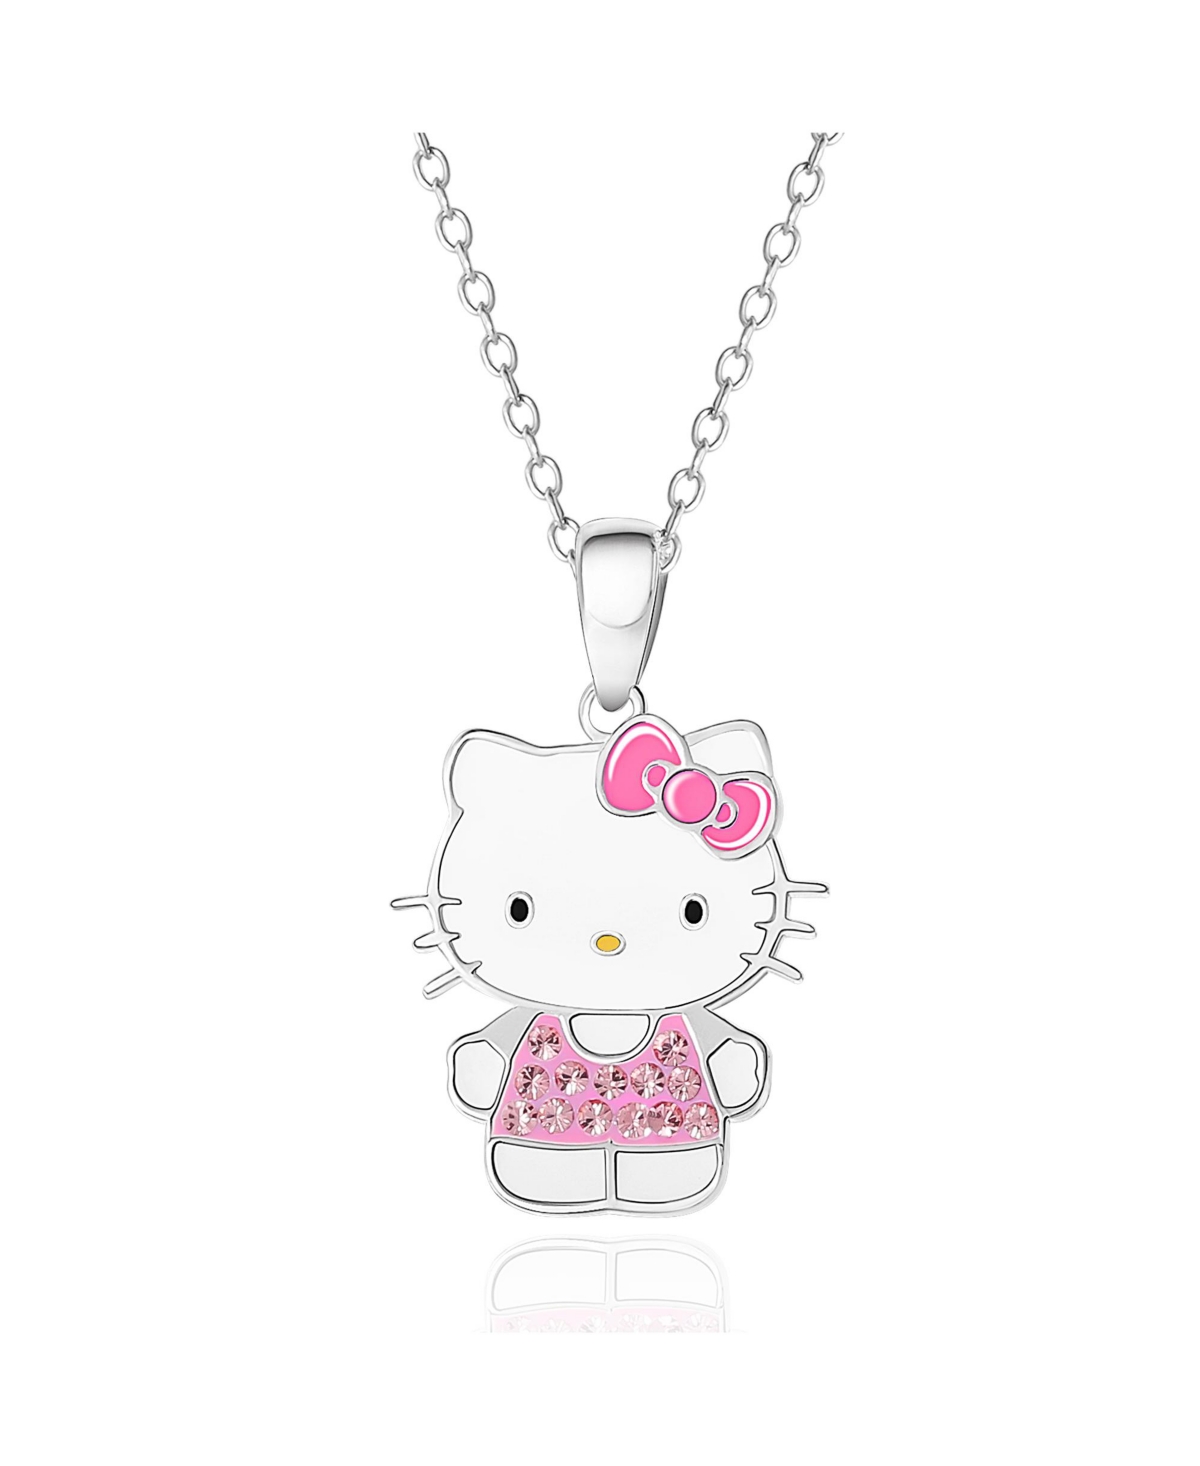 Sanrio Hello Kitty Enamel Pink Cubic Zirconia Necklace - 18'' Chain, Authentic Officially Licensed - White, pink